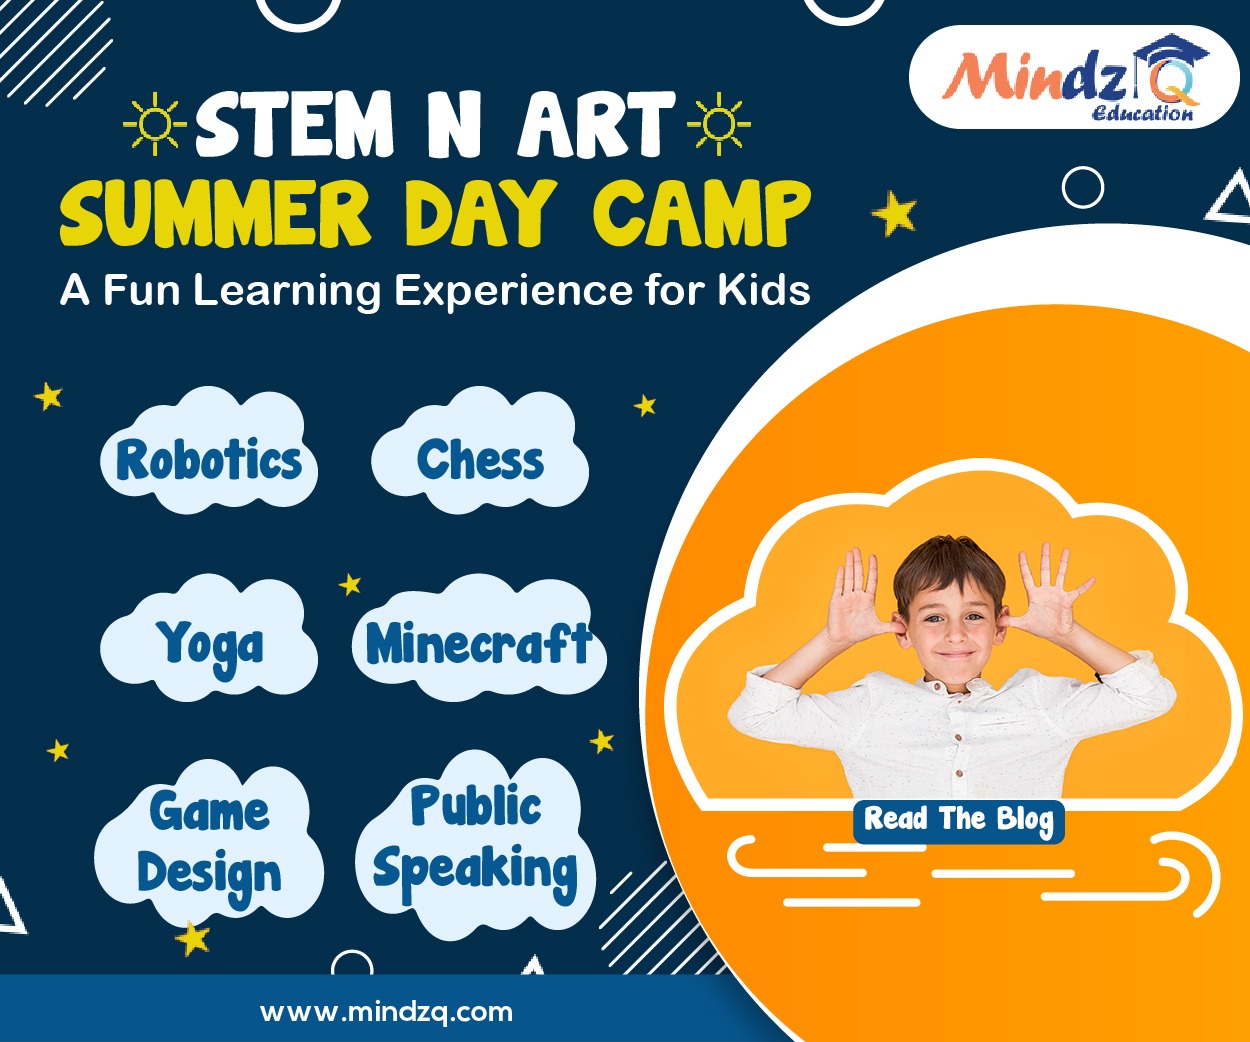 MindzQ Education Summer Day Camp: A Fun Learning Experience for Kids